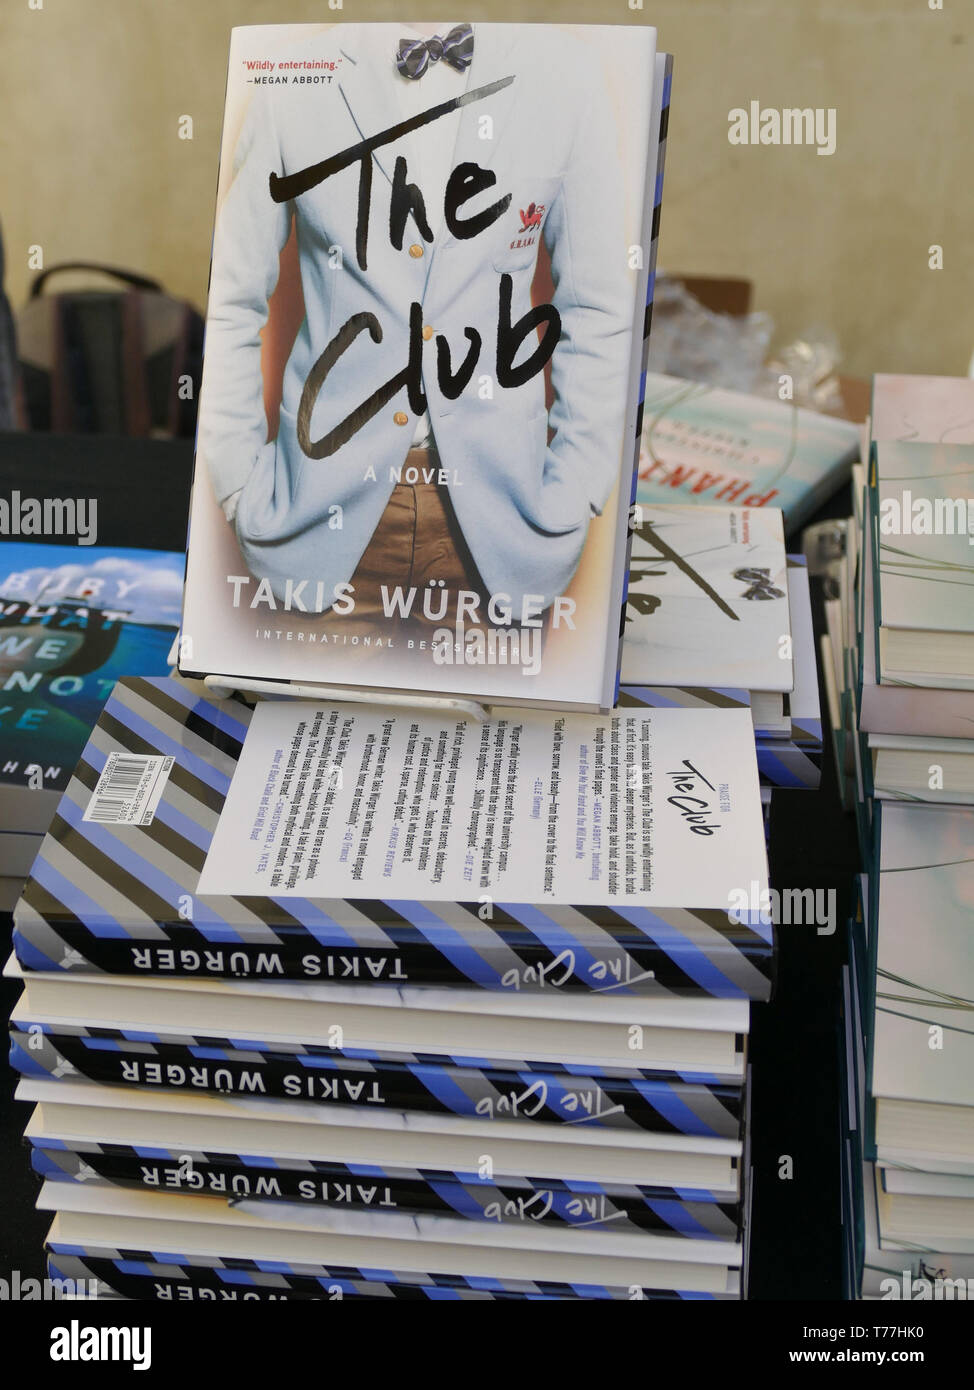 Berkeley, USA. 04th May, 2019. The book "The Club" by writer Takis Würger  is available at the Bay Area Book Festival. The Goethe-Institut's  invitation of German authors was prompted by the Germany